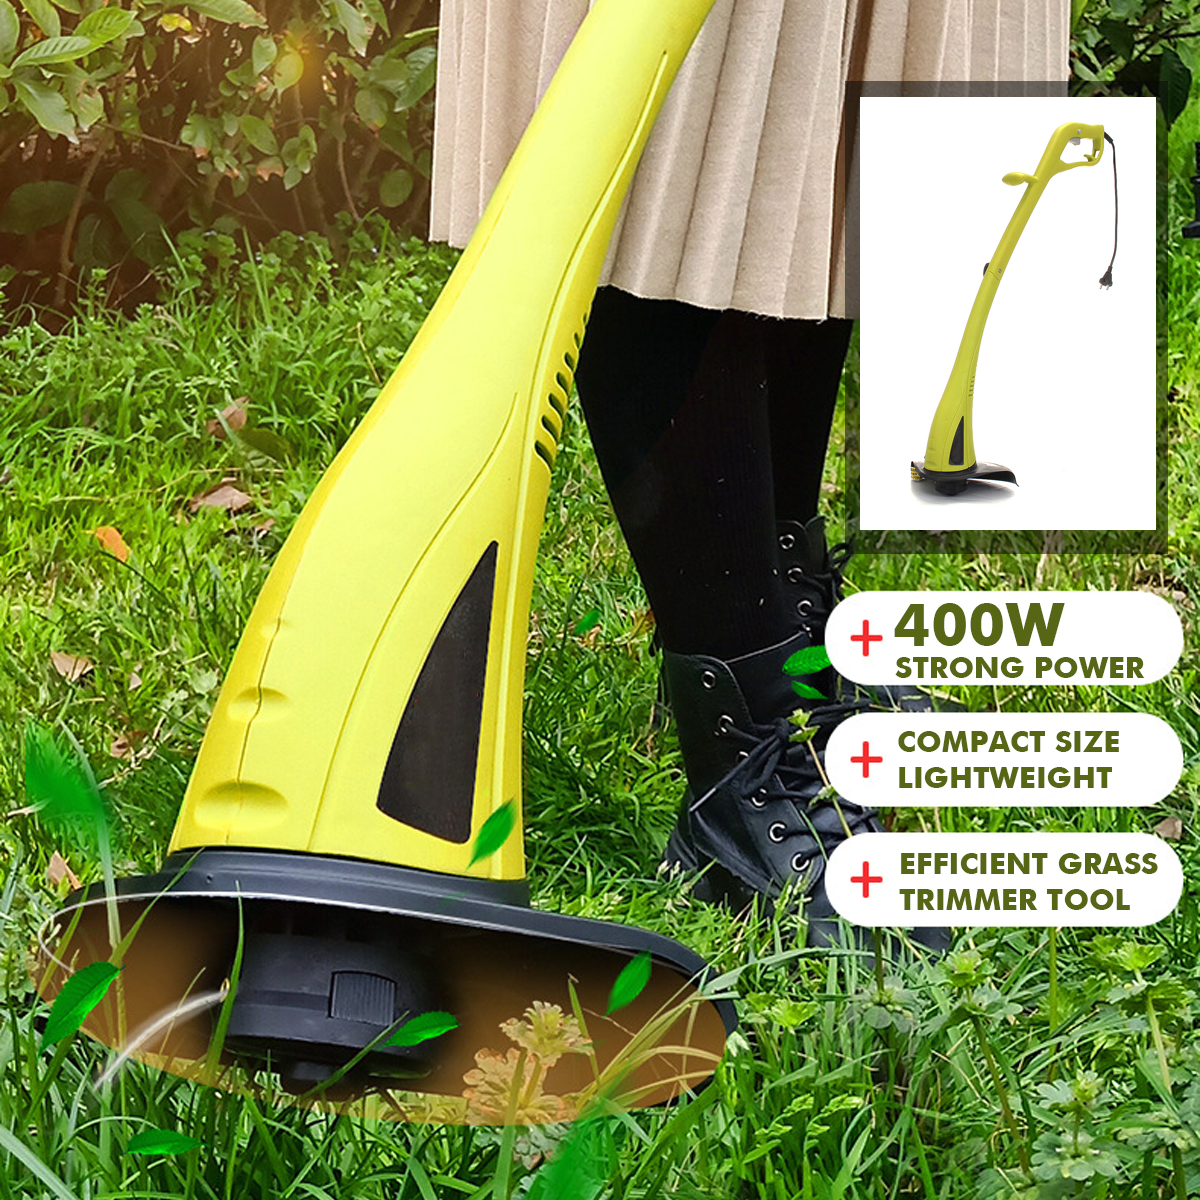 400W 220V Electric Corded Garden Grass Trimmer Edge Weed Strimmer String Tool Lawn Mower